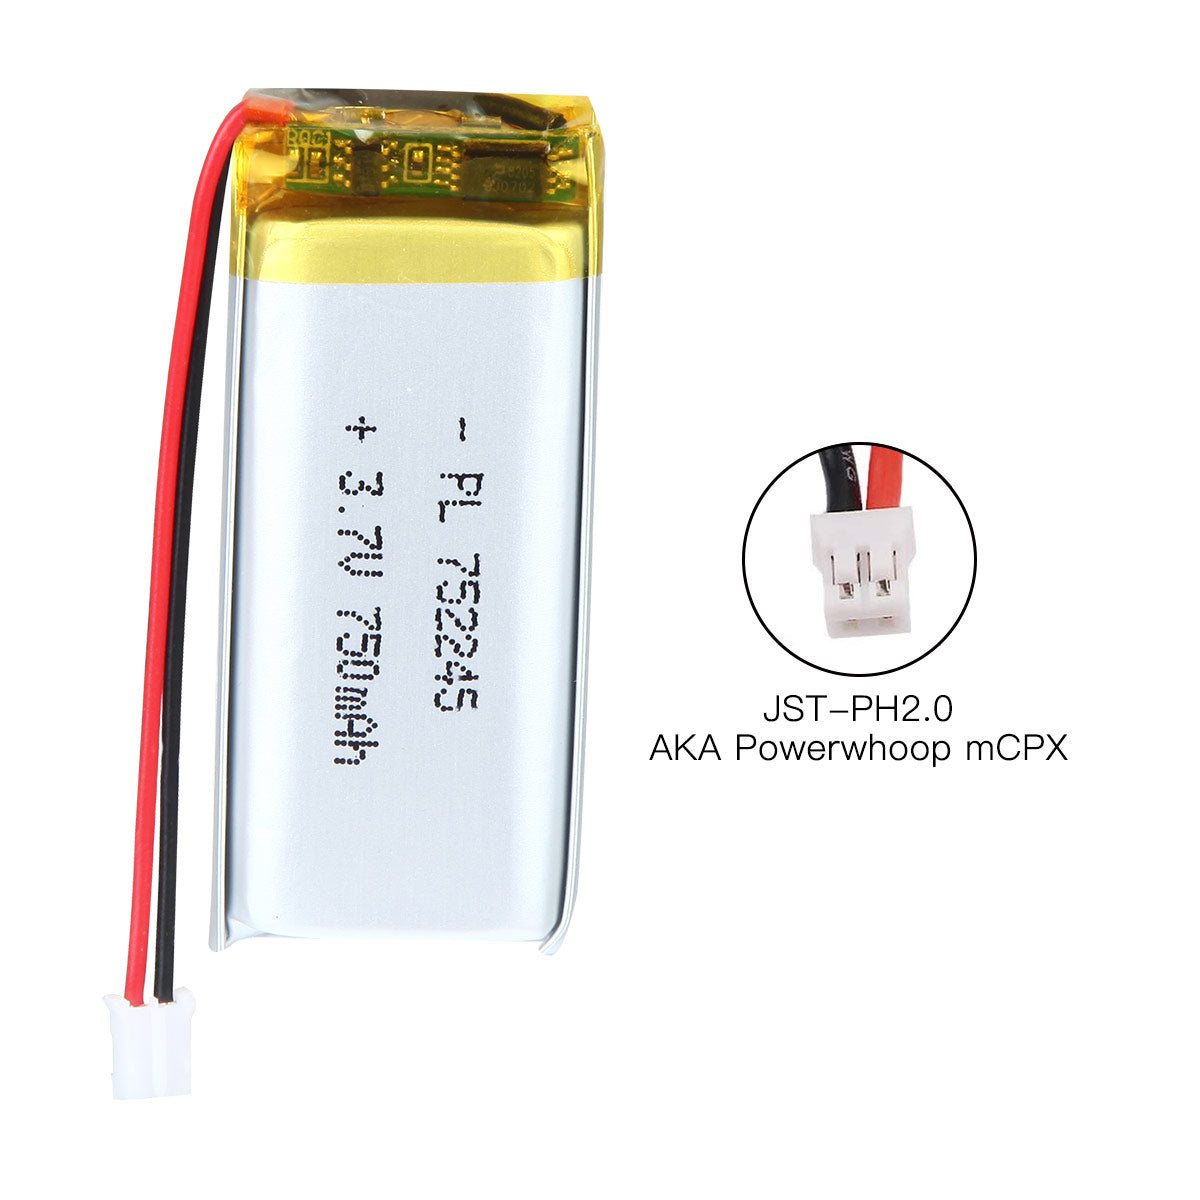 YDL 3.7V 750mAh 752245 Rechargeable Lipo Battery with JST Connector - YDL Battery